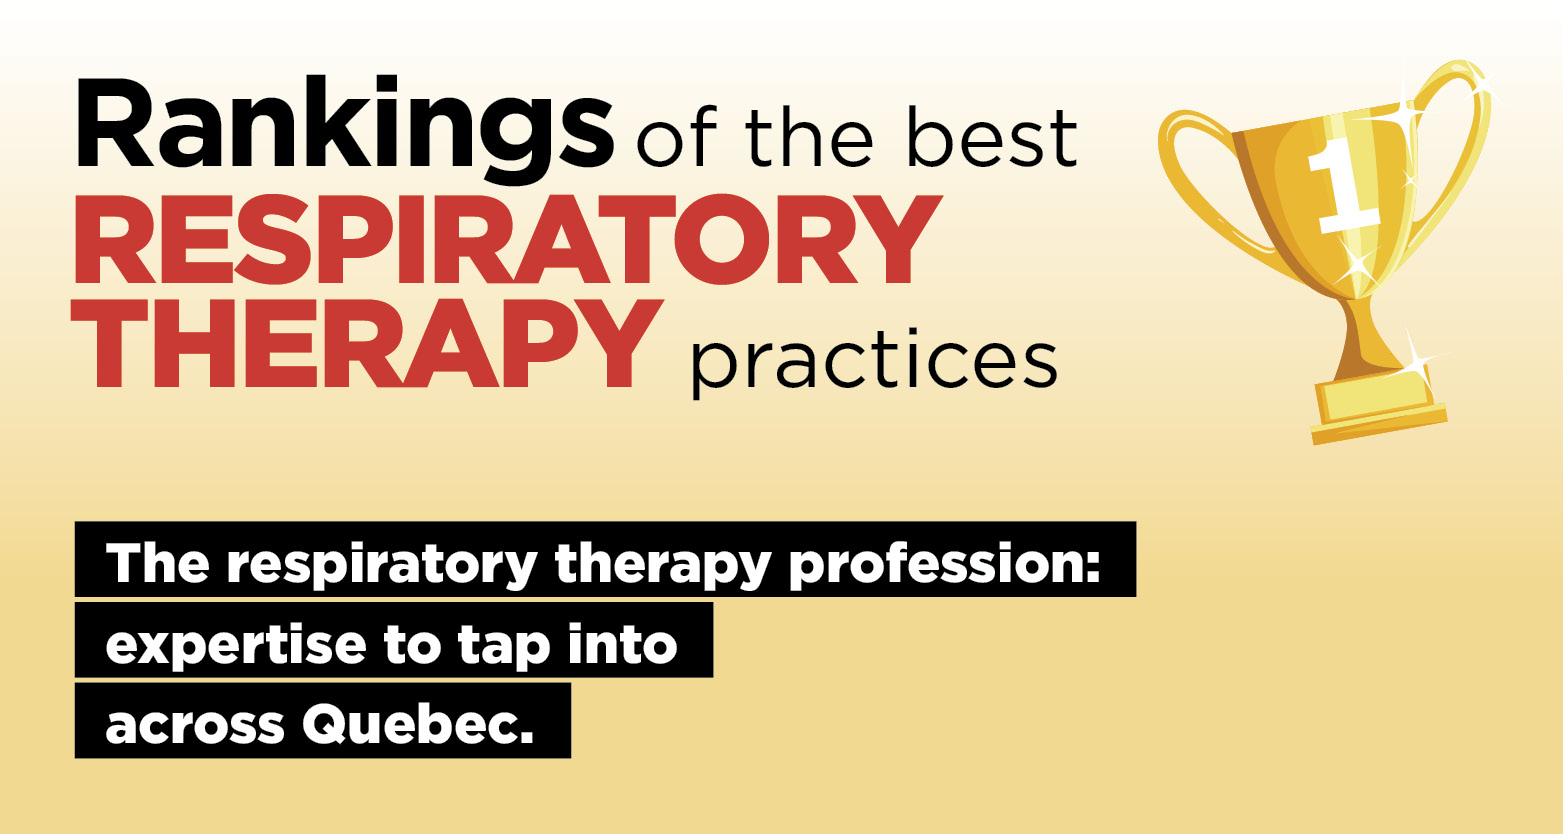 Rankings of best respiratory therapy practices